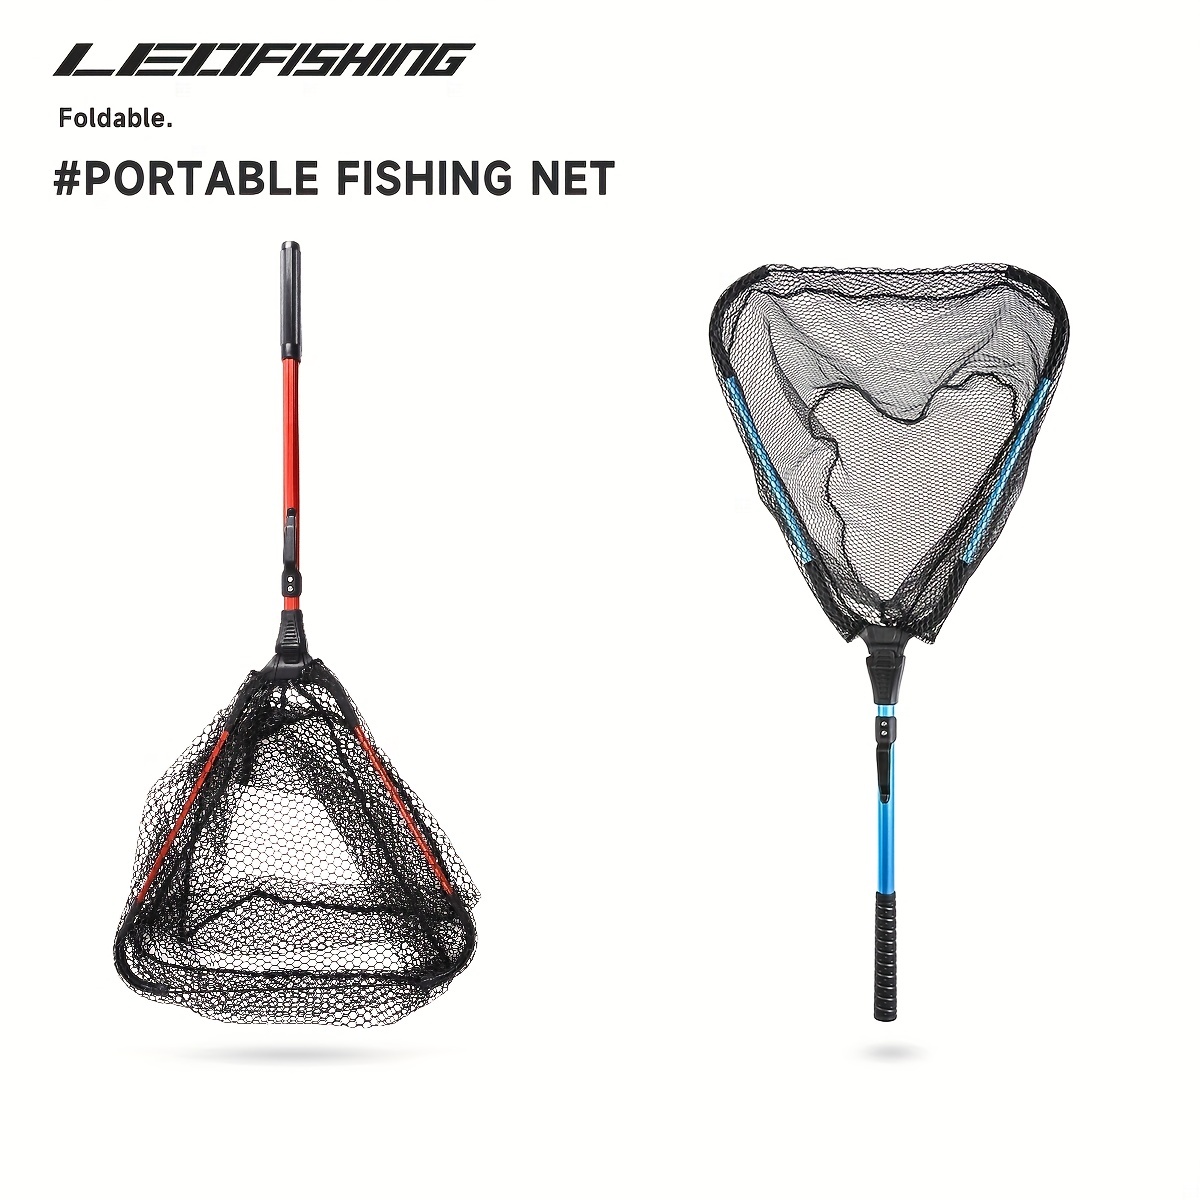 LEOFISHING Portable Aluminum Fishing Net - Foldable and Retractable for  Freshwater and Saltwater Fishing - Lightweight and Durable